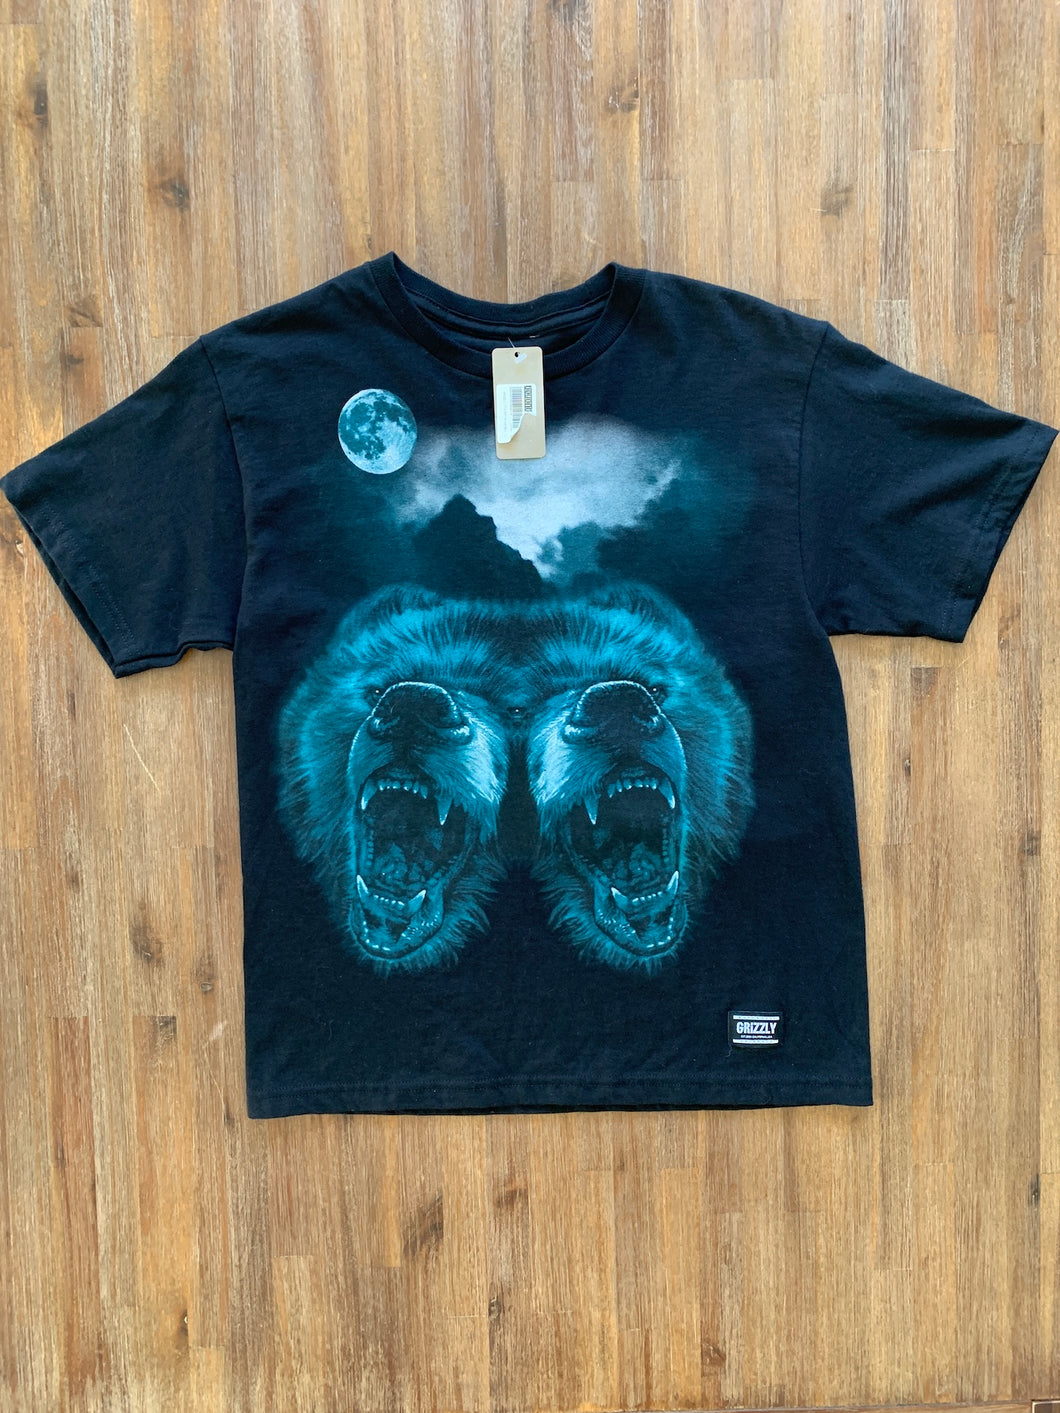 GRIZZLY GRIPTAPE Size Youth Medium New Road Black Skate T-Shirt Boys